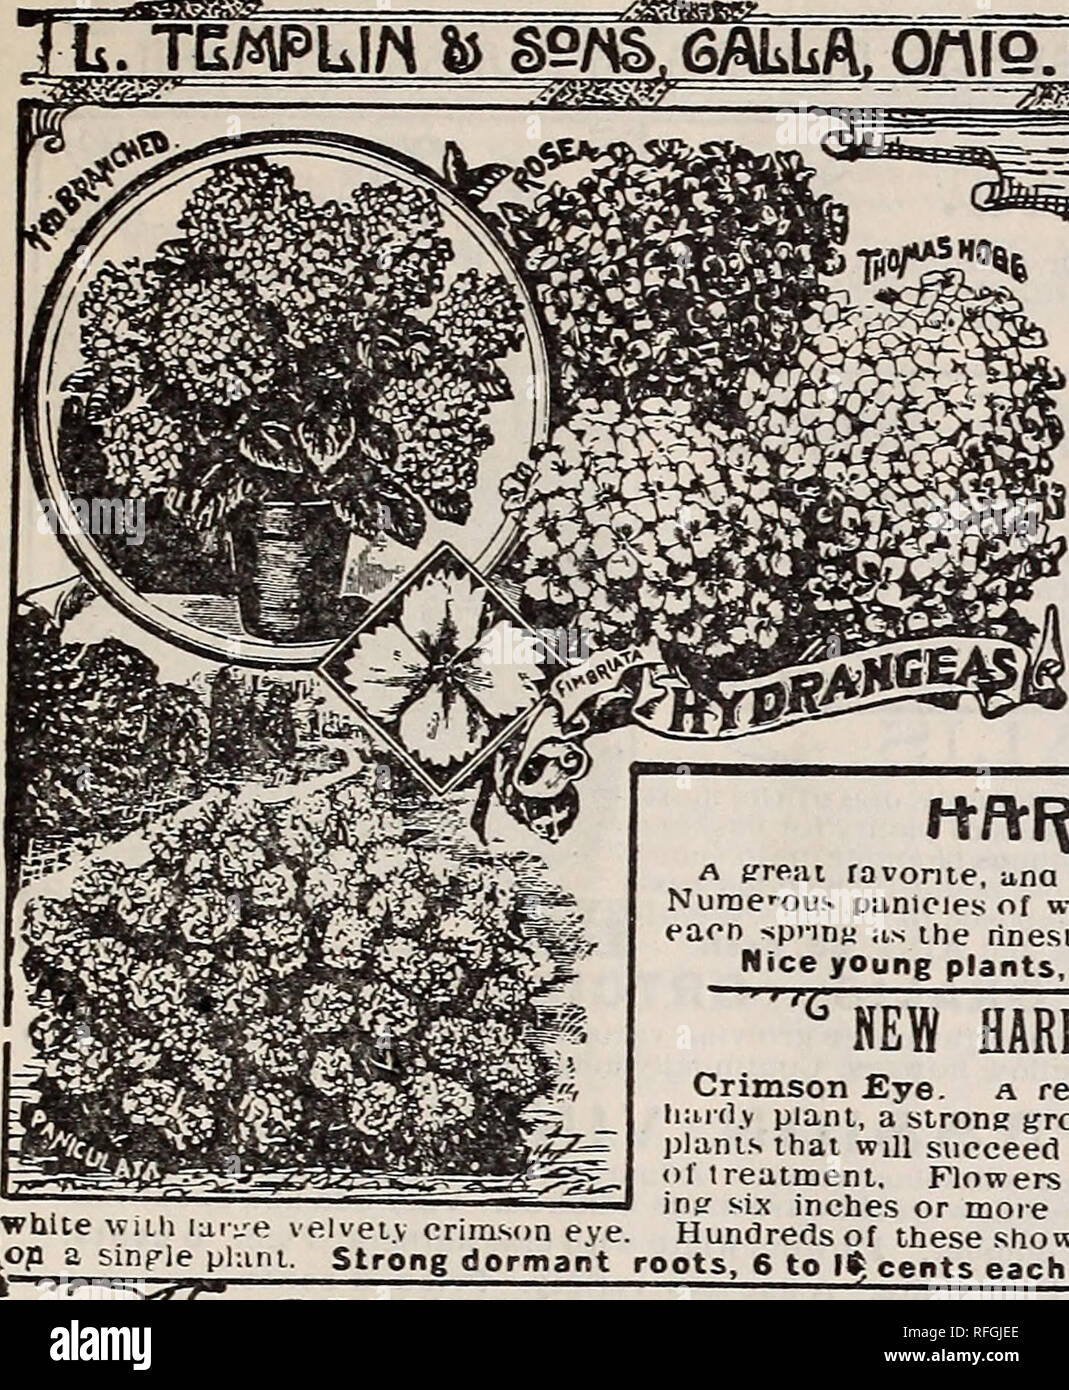 . Seeds and plants : 1900. Nurseries (Horticulture) Ohio Catalogs; Nursery stock Ohio Catalogs; Vegetables Seeds Catalogs; Flowers Catalogs; Fruit Catalogs; Plants, Ornamental Catalogs. ^ -==- varanaa man tne Hydrangea. They are ot tne easiest culture, increasing in size ana beautv from year to year a well grown specimen is a beautiful sight, remaining in bloom throughout the entf» season. They should oe wintered dormant in a cold cellar A little freezing will noi injure them We offer only the best sorts. Thomas Hogg. Immense trusses of pure white flowers. One oi the most profuse bloomers we  Stock Photo